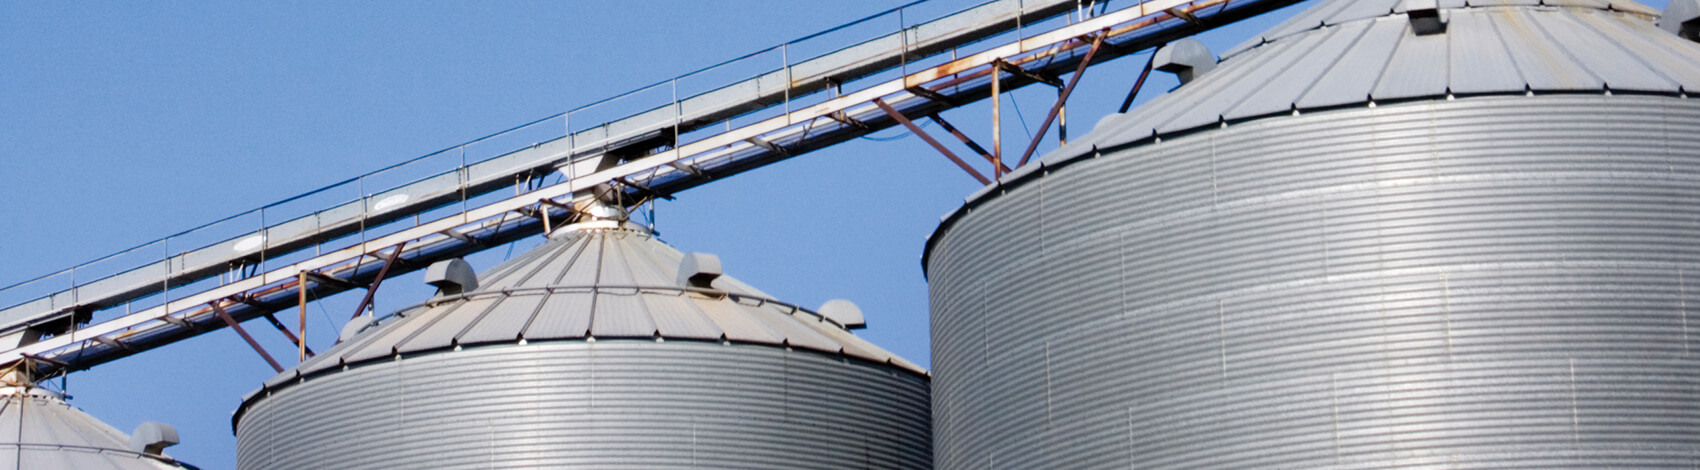 Agricultural silos painted with Jetcoat fibered aluminum roof coating